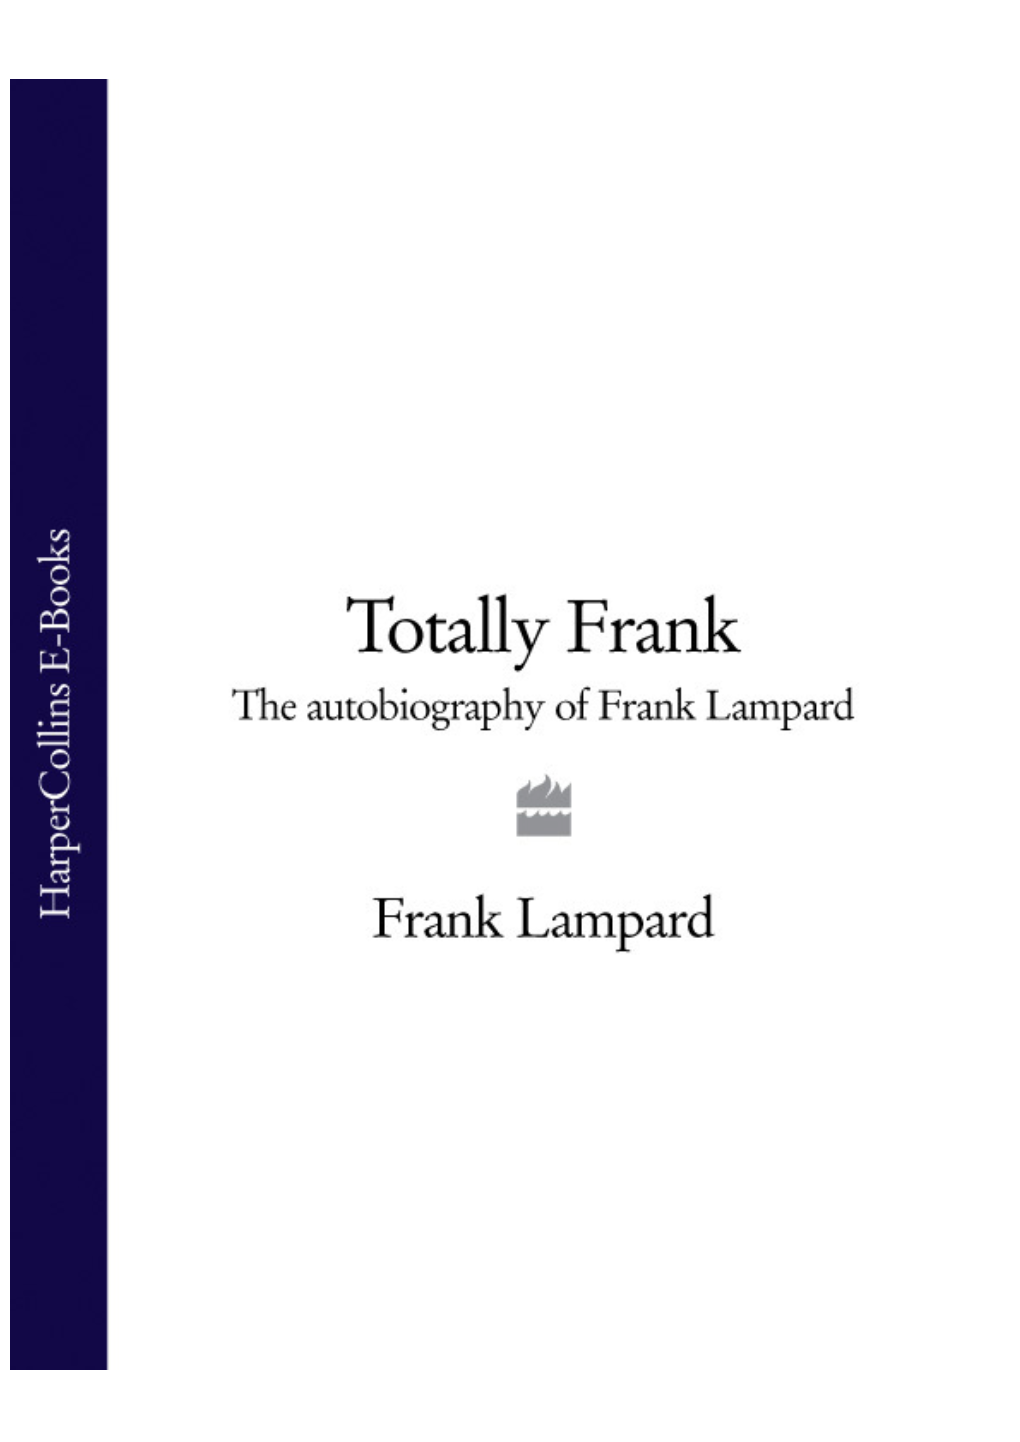 Totally Frank: the Autobiography of Frank Lampard